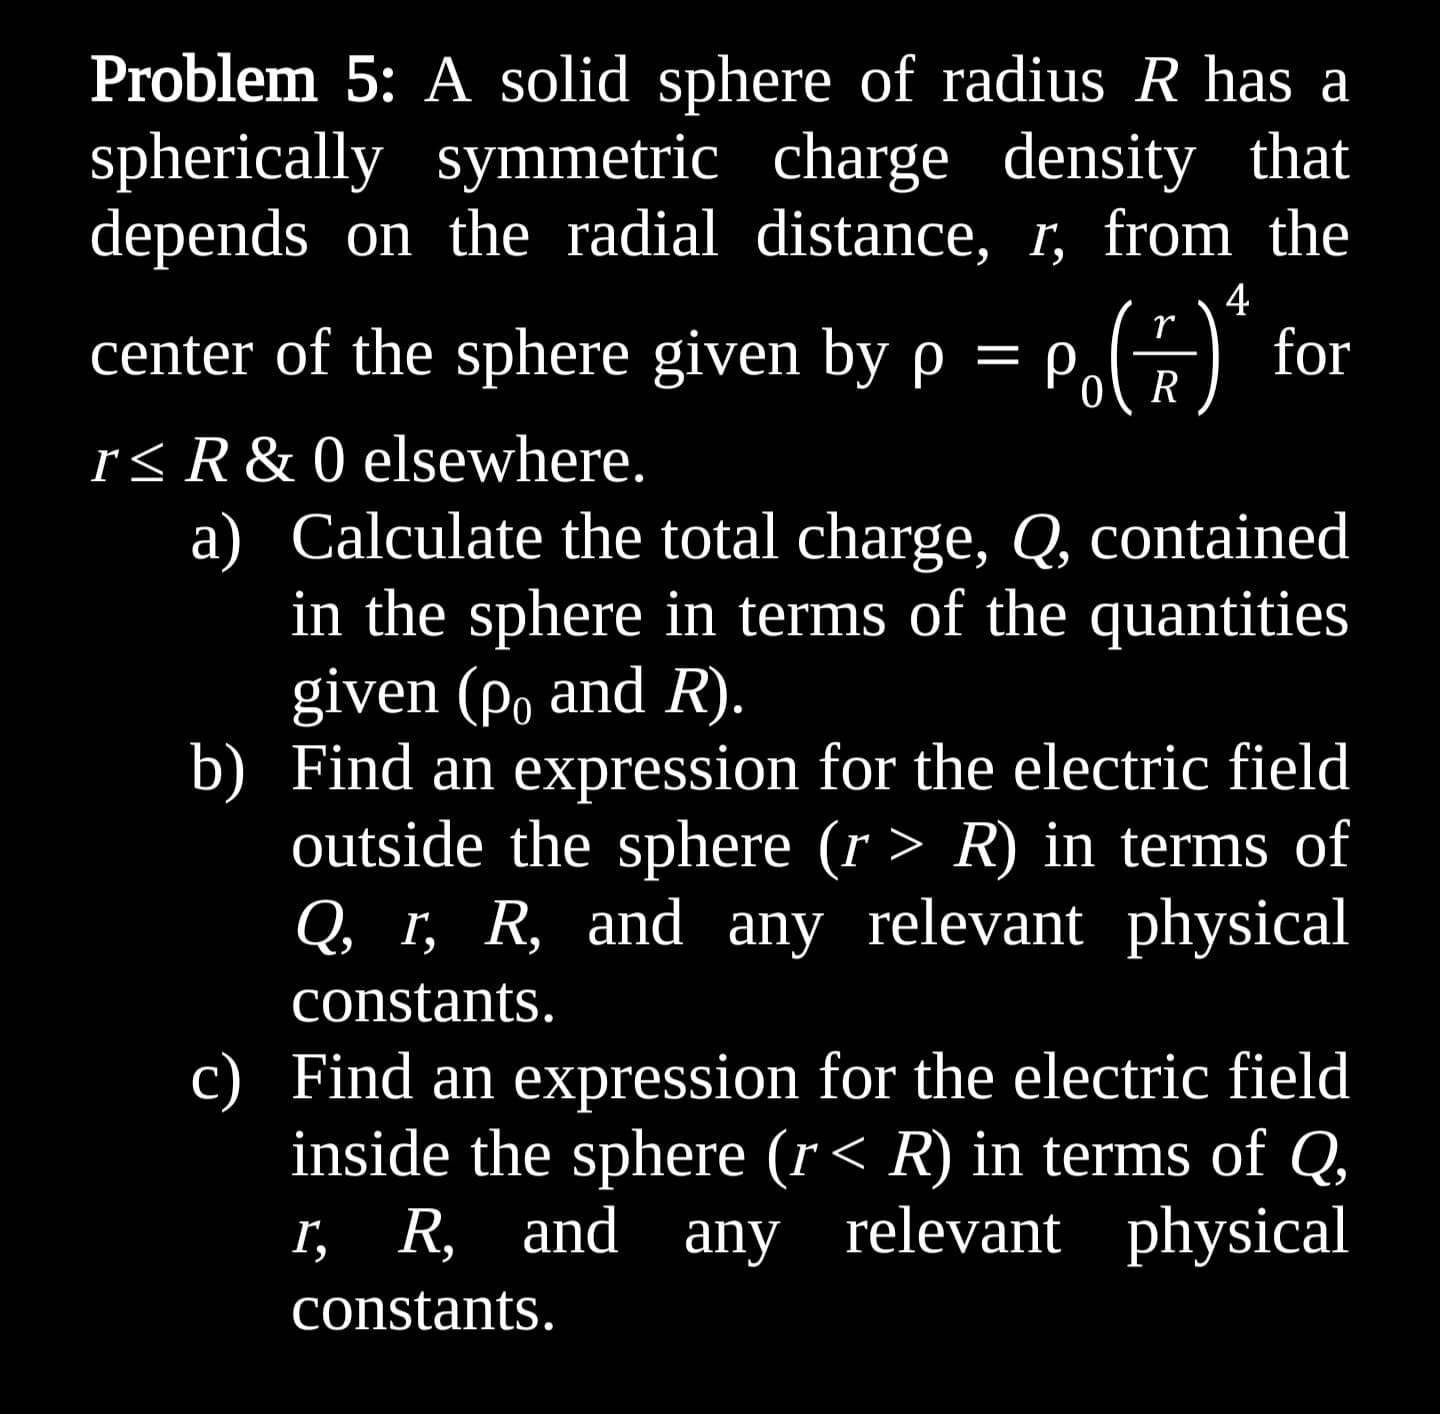 Problem 5: A solid sphere of radius R has a
spherically symmetric charge density that
depends on the radial distance, r, from the
4
r
center of the sphere given by p = P()* fc
p,
for
R
r≤ R & 0 elsewhere.
a)
Calculate the total charge, Q, contained
in the sphere in terms of the quantities
given (po and R).
b) Find an expression for the electric field
outside the sphere (r > R) in terms of
Q, r, R, and any relevant physical
constants.
c) Find an expression for the electric field
inside the sphere (r< R) in terms of Q,
r, R, and any relevant physical
constants.